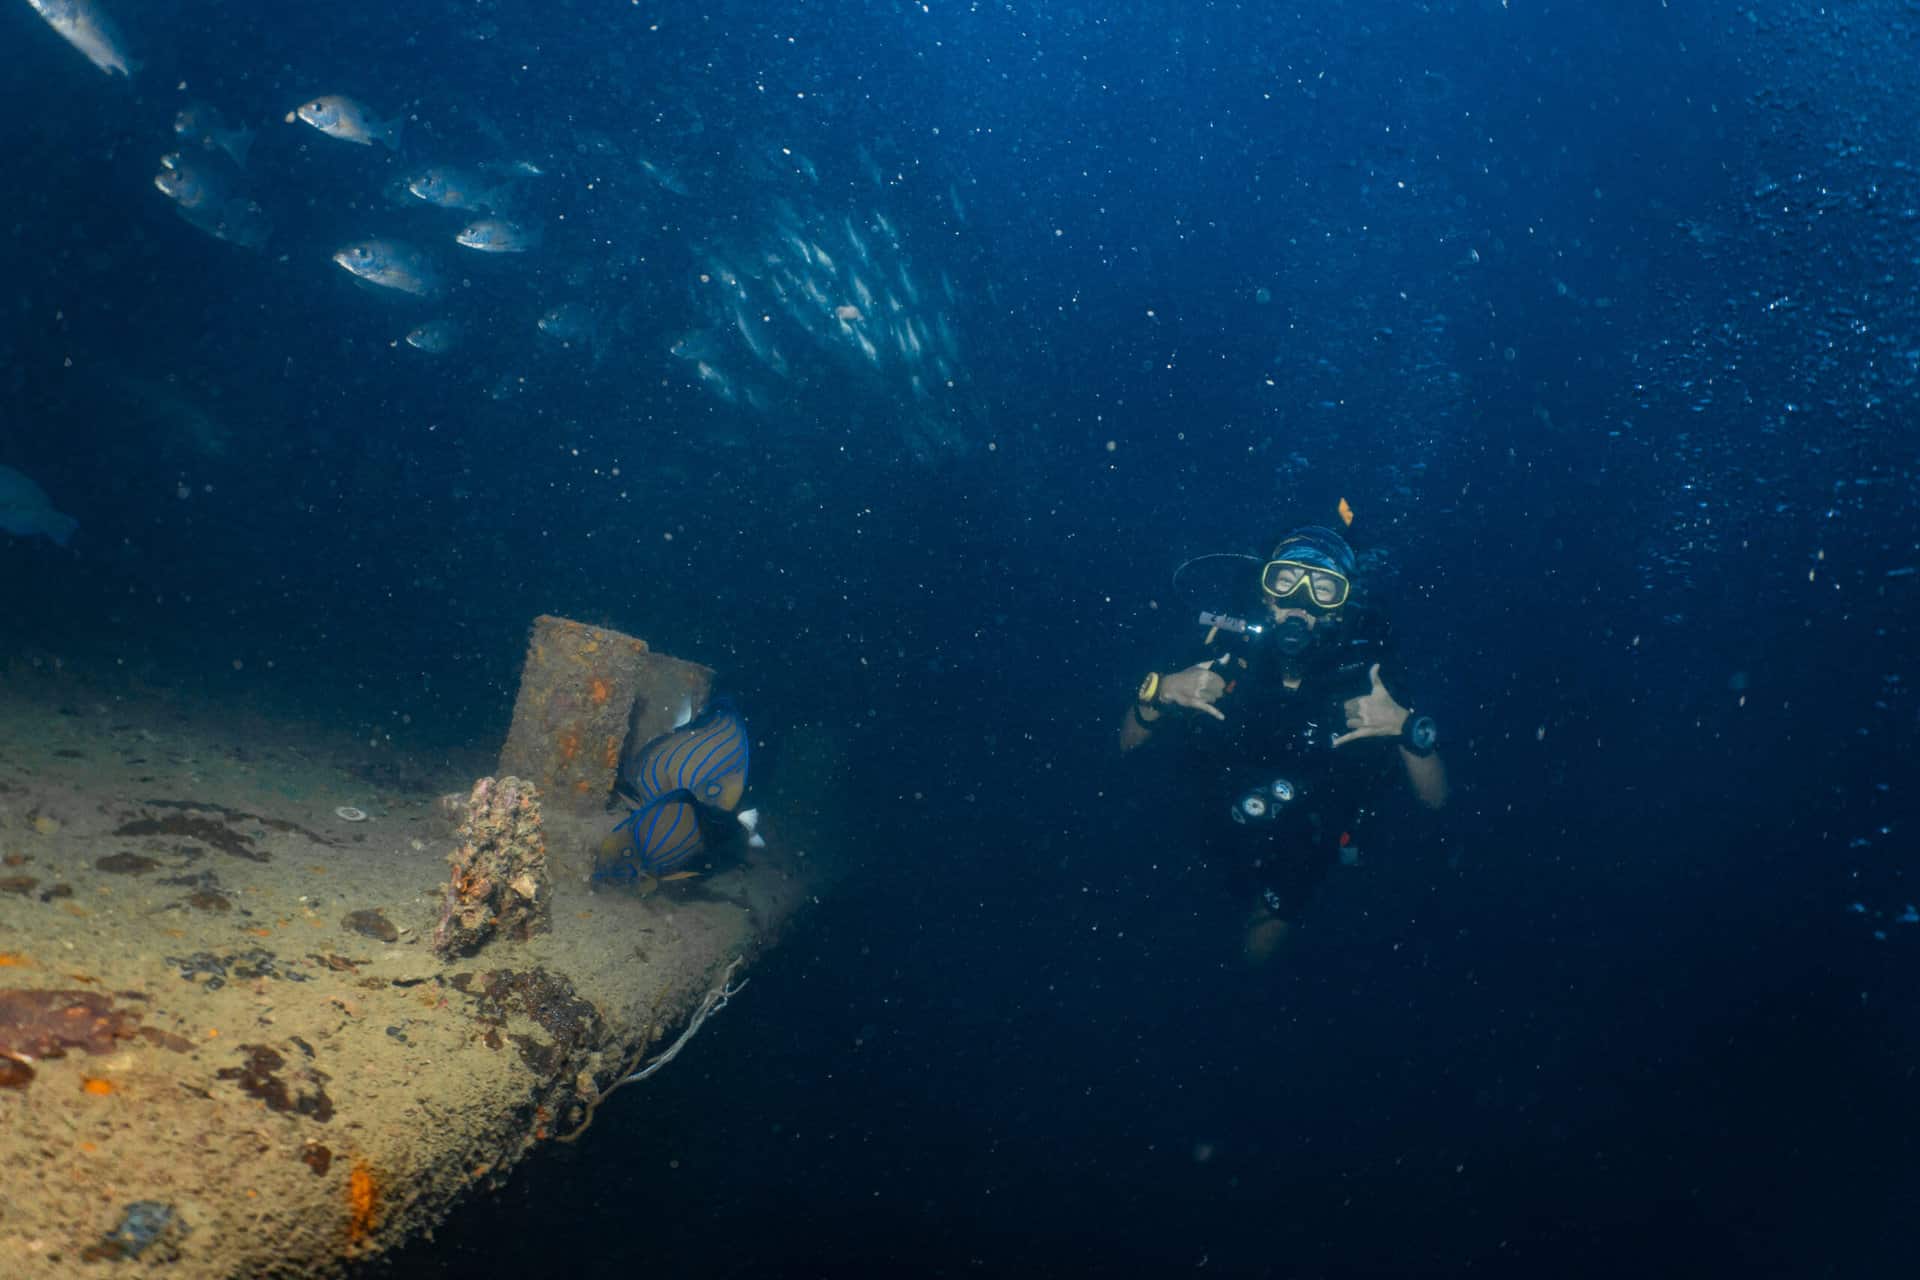 The wreck dive is part of the advanced course on Koh Tao